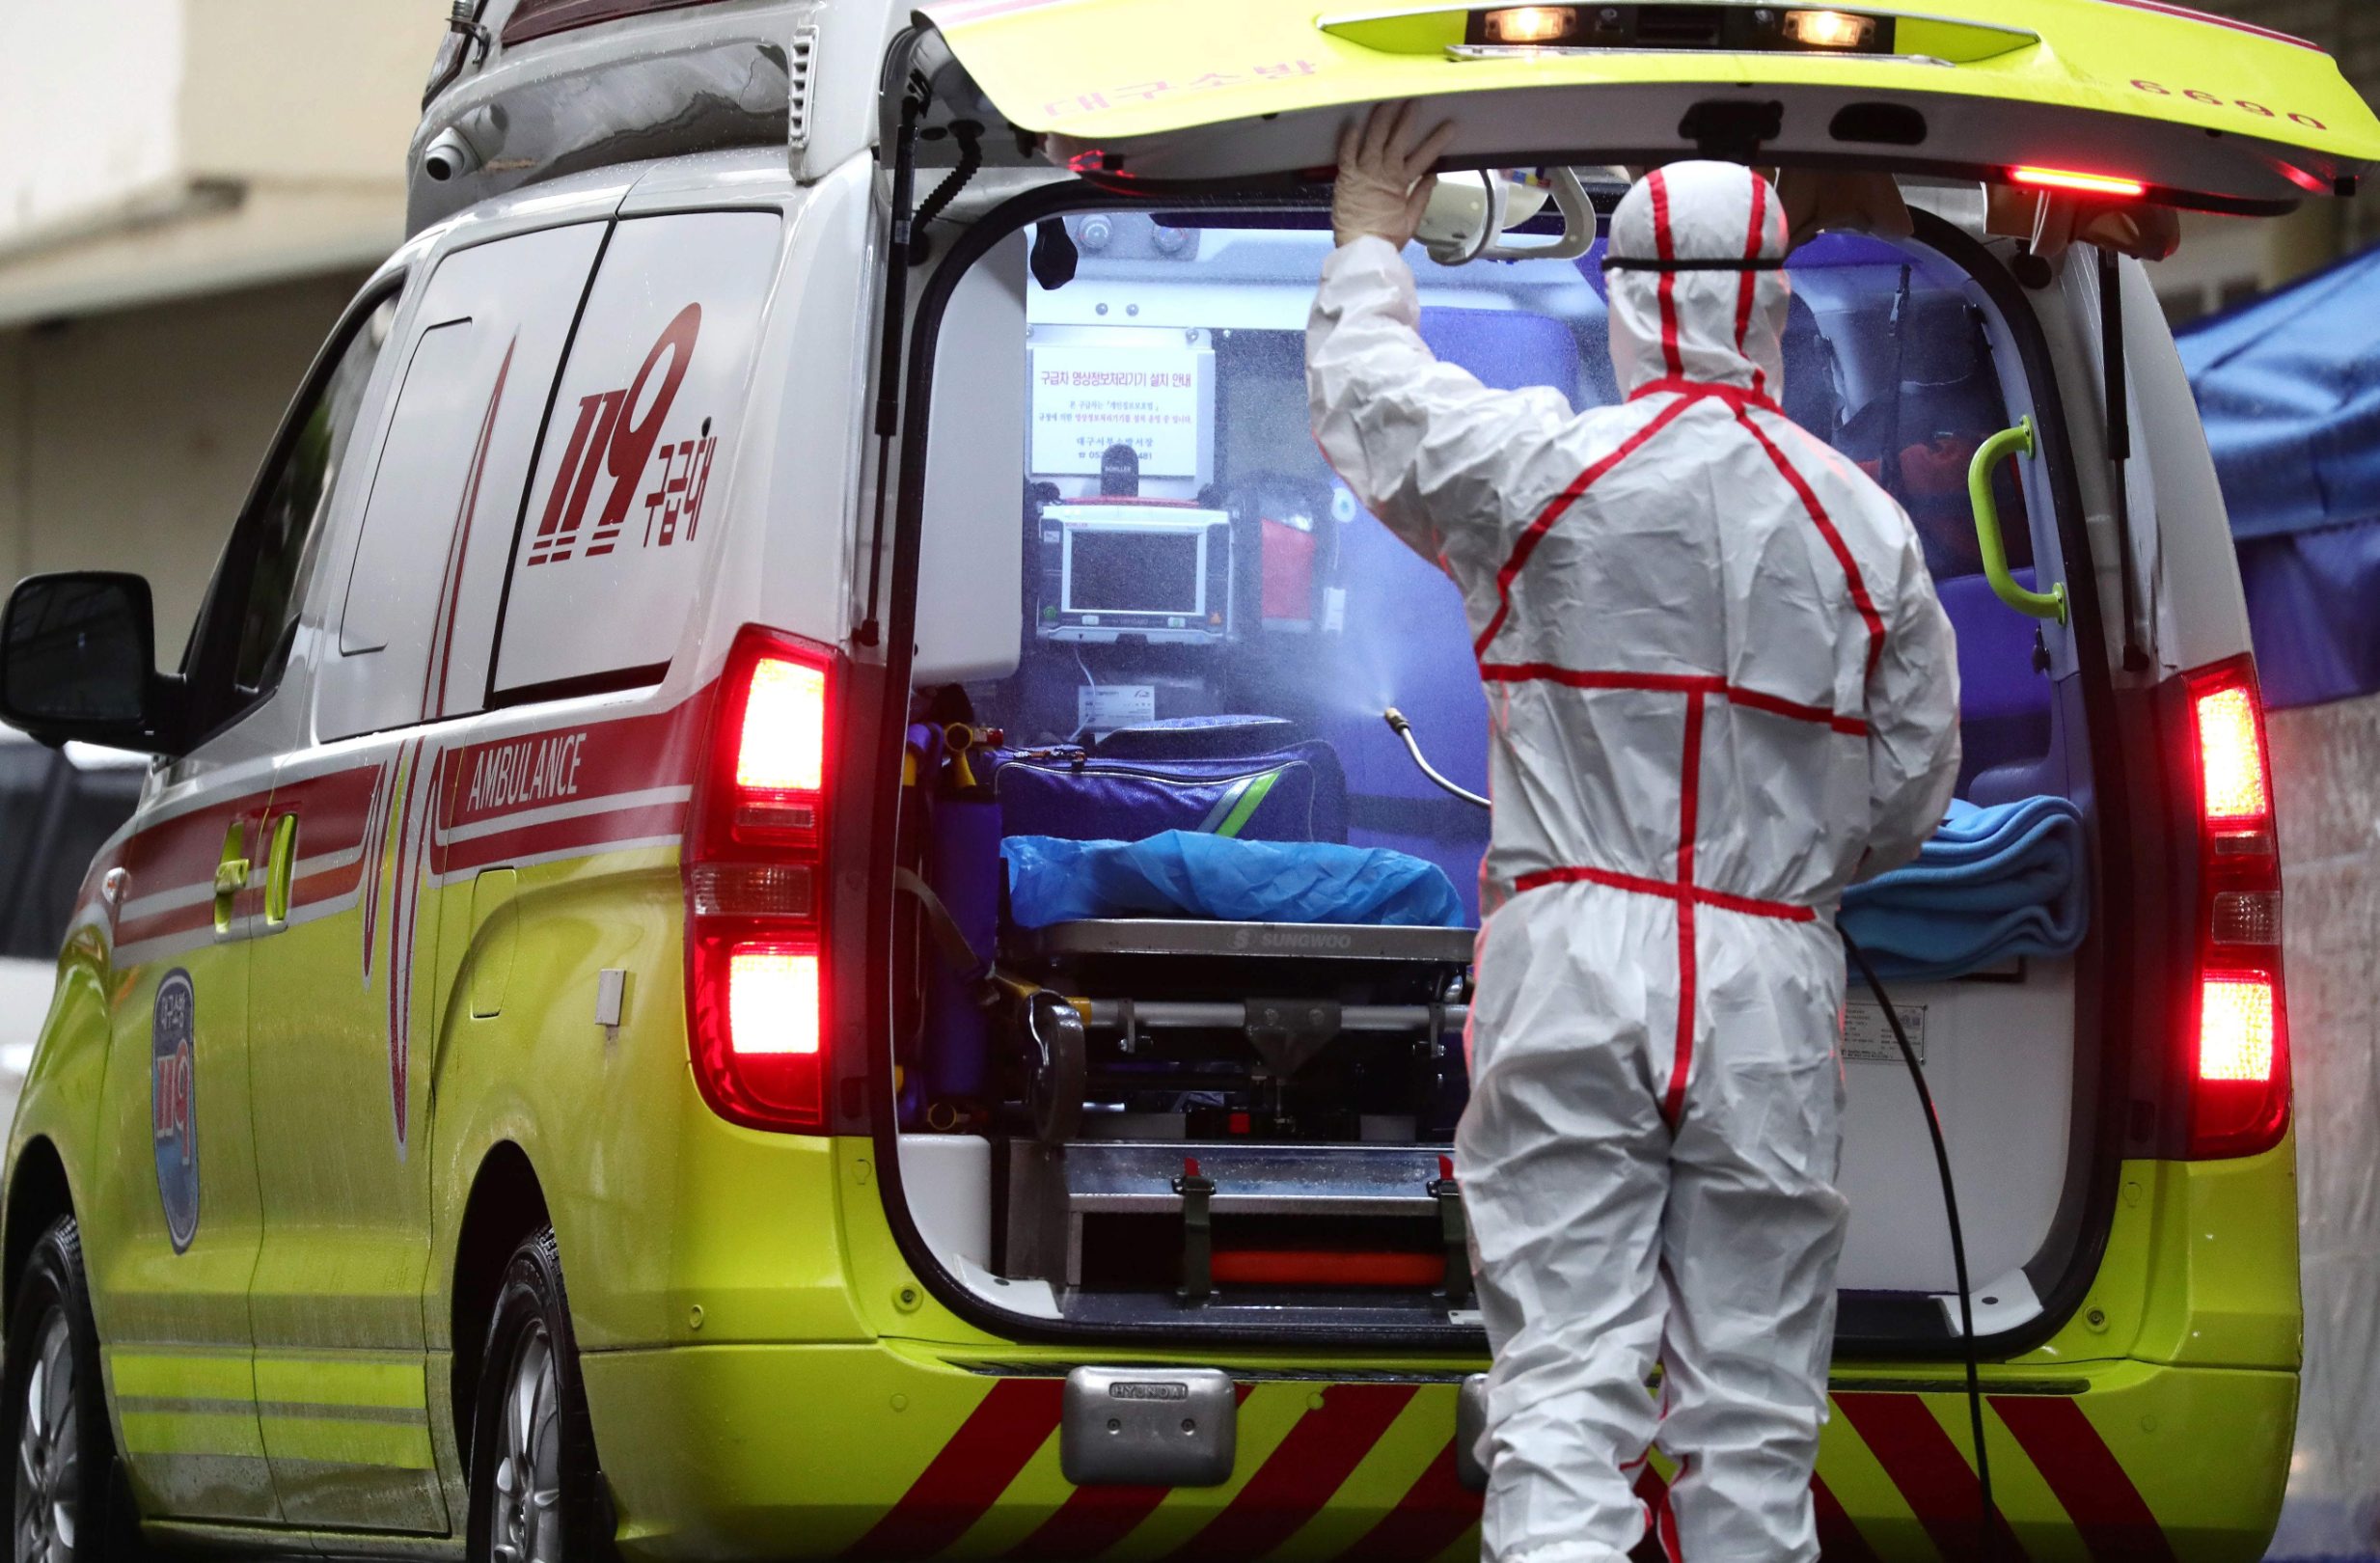 A medical worker sprays disinfectant into an ambulance at a hospital where patients infected with the COVID-19 coronavirus are being treated, in the southeastern city of Daegu on February 25, 2020. - The novel coronavirus outbreak in South Korea is 